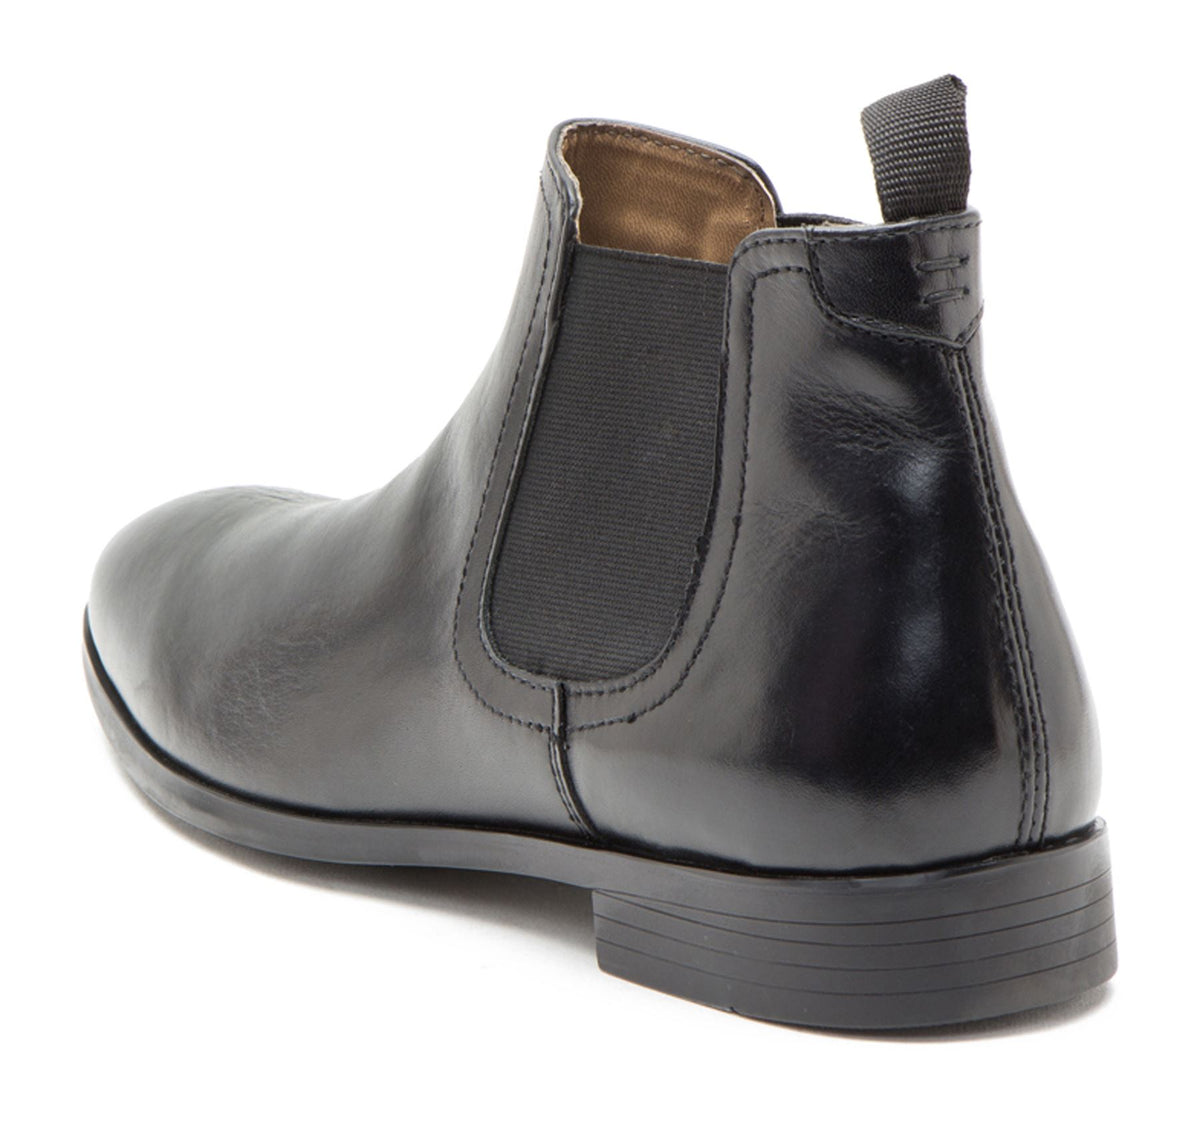 Red Tape Crick Beeston Casual Formal Mens Leather Pull On Chelsea Boots